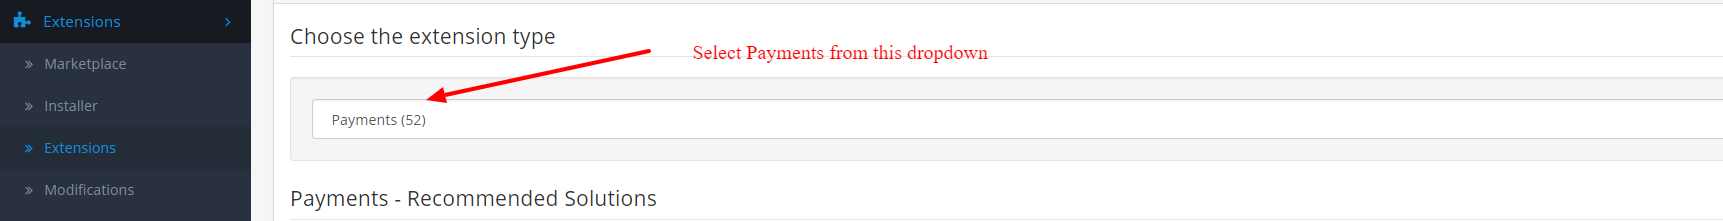 select payments  in extensions type